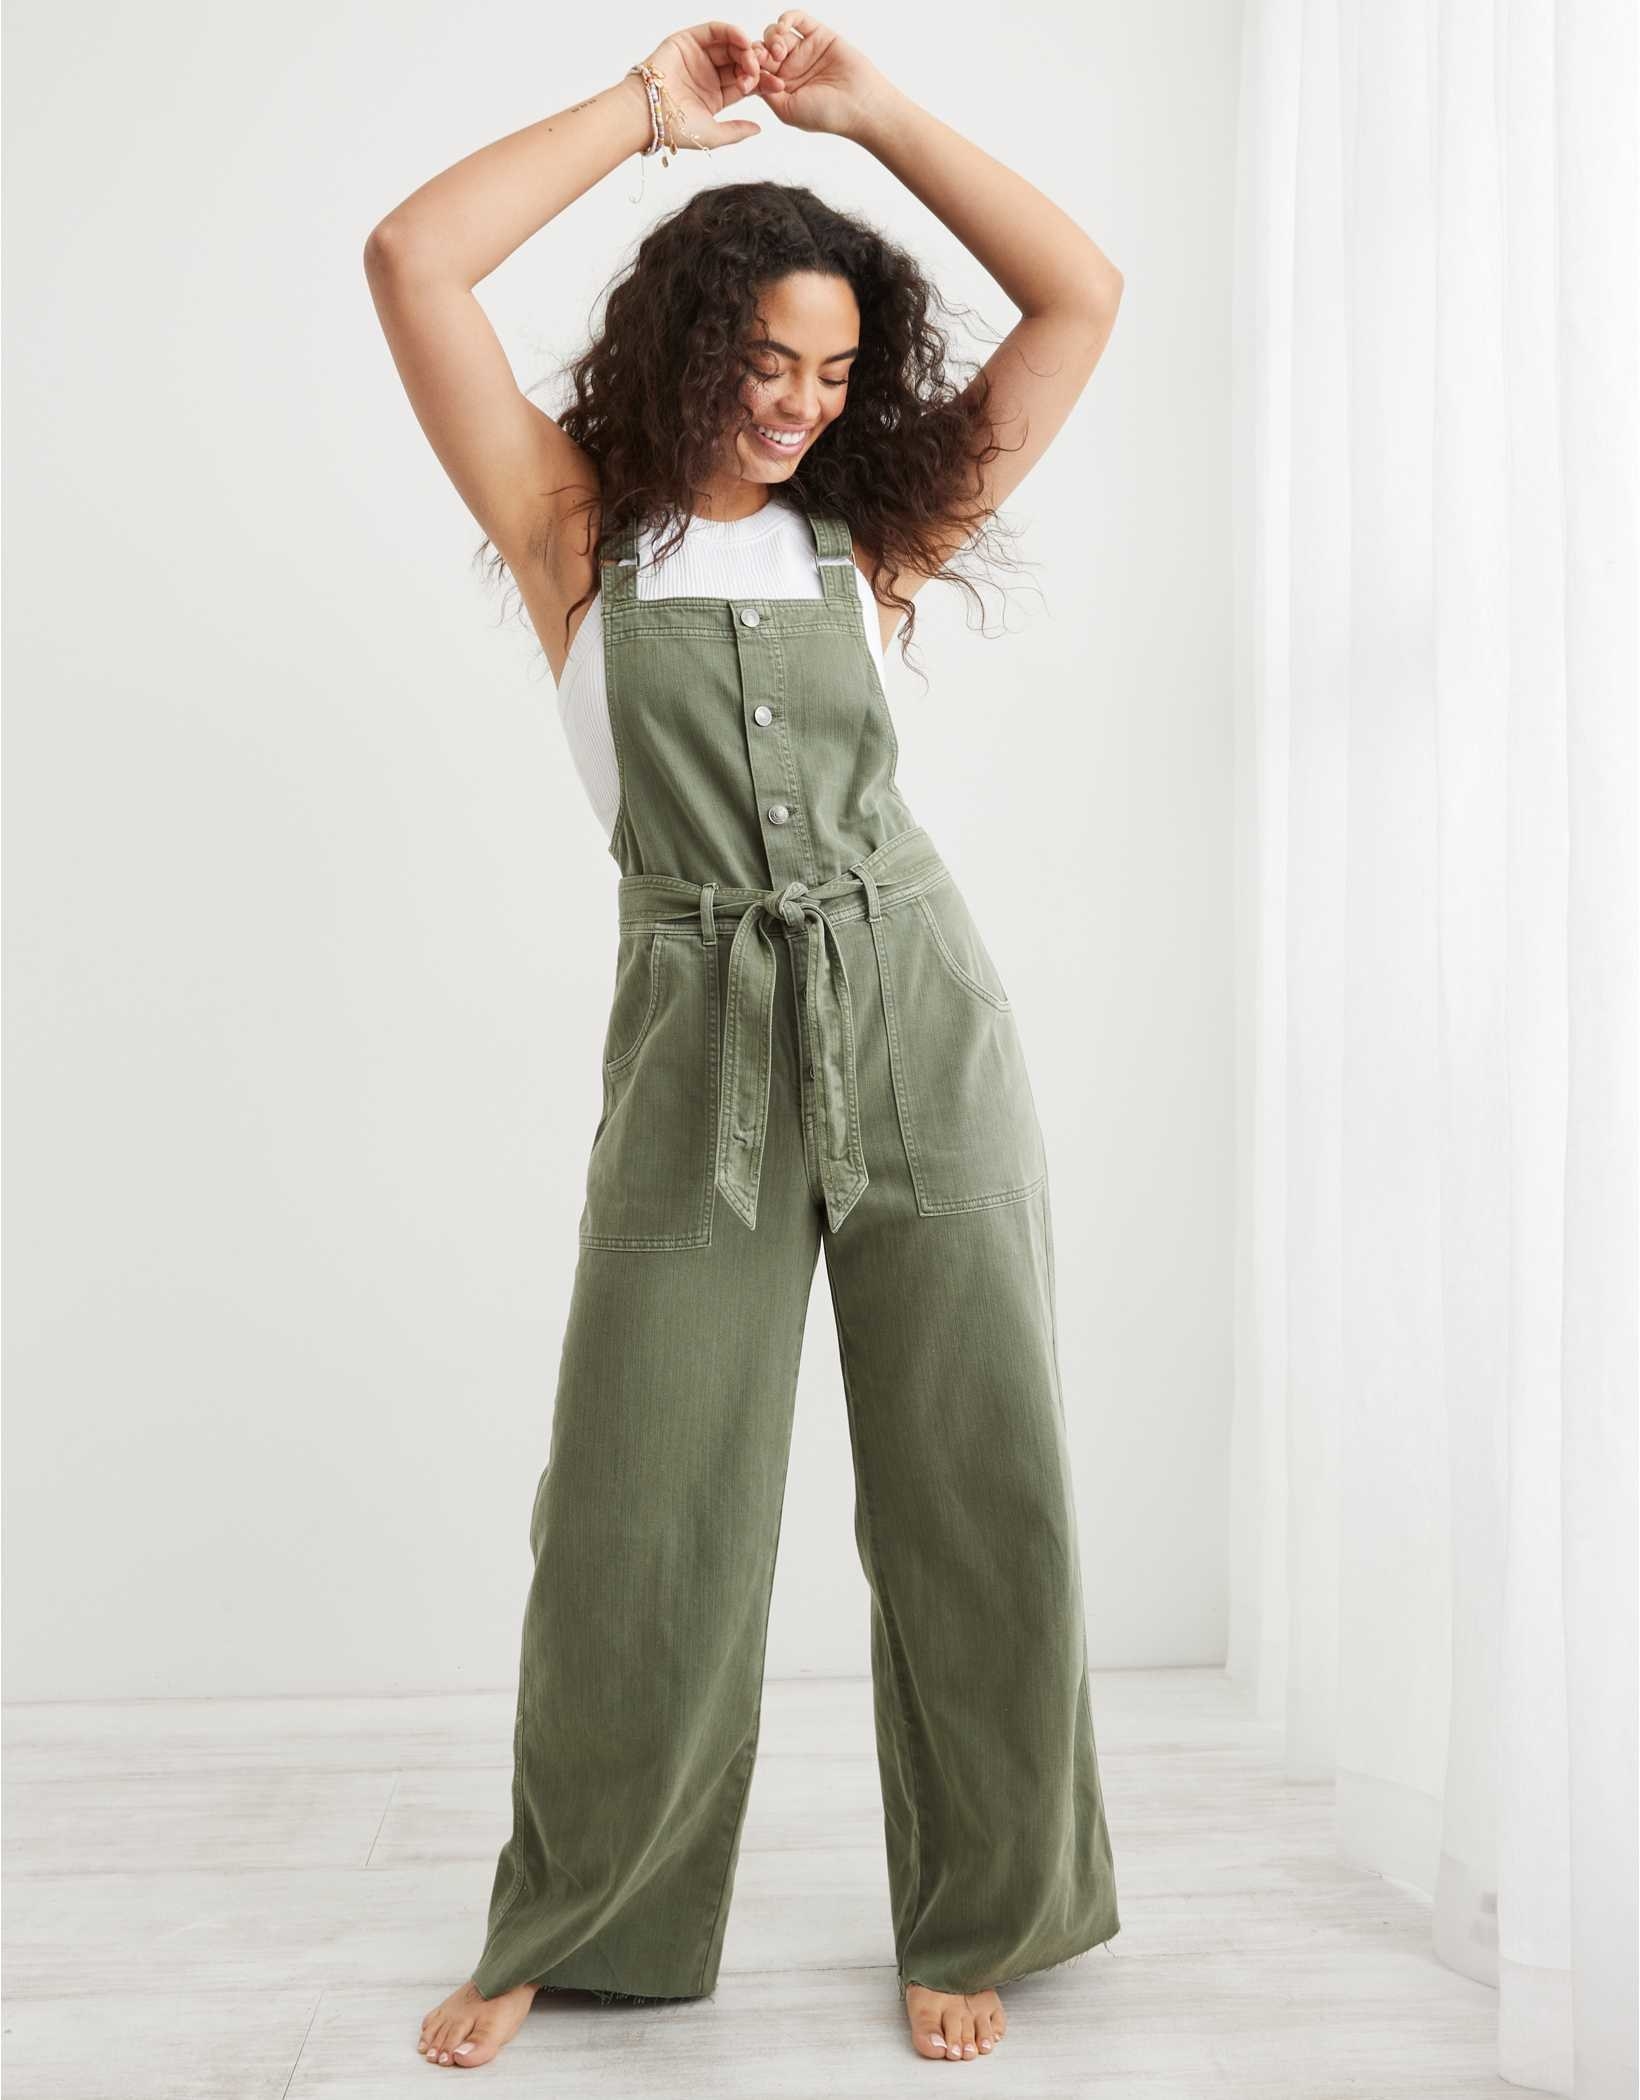 model in sage green linen-y overalls with a buttoned front and waist tie